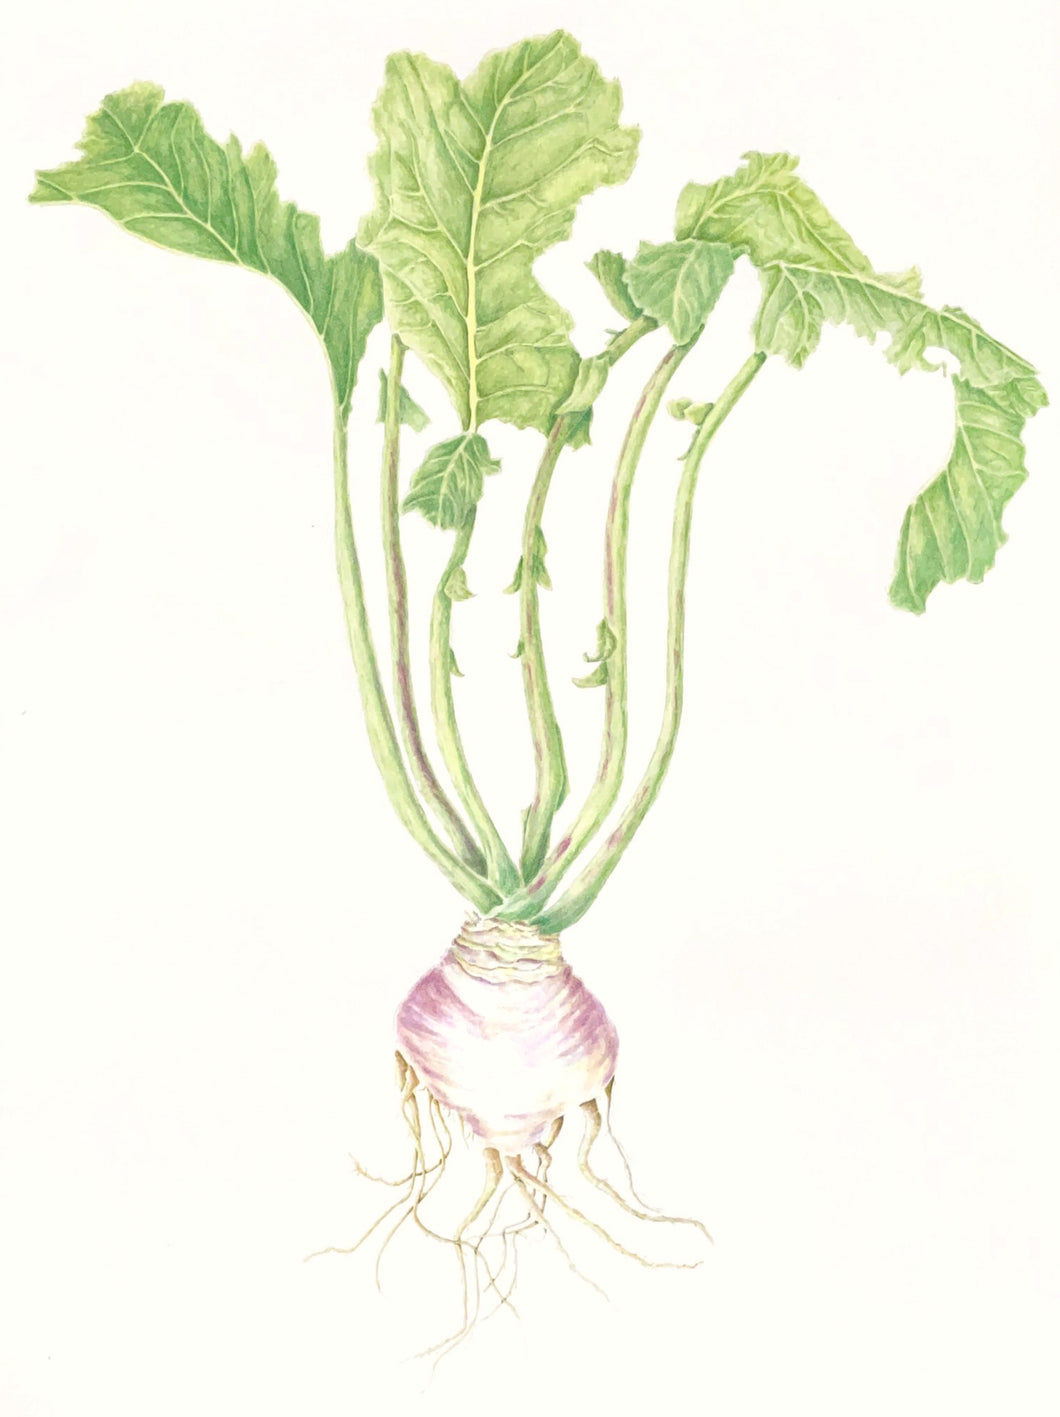 Turnip Botanical Watercolor Print on Hahnemuhle Paper 11x14 with white mat